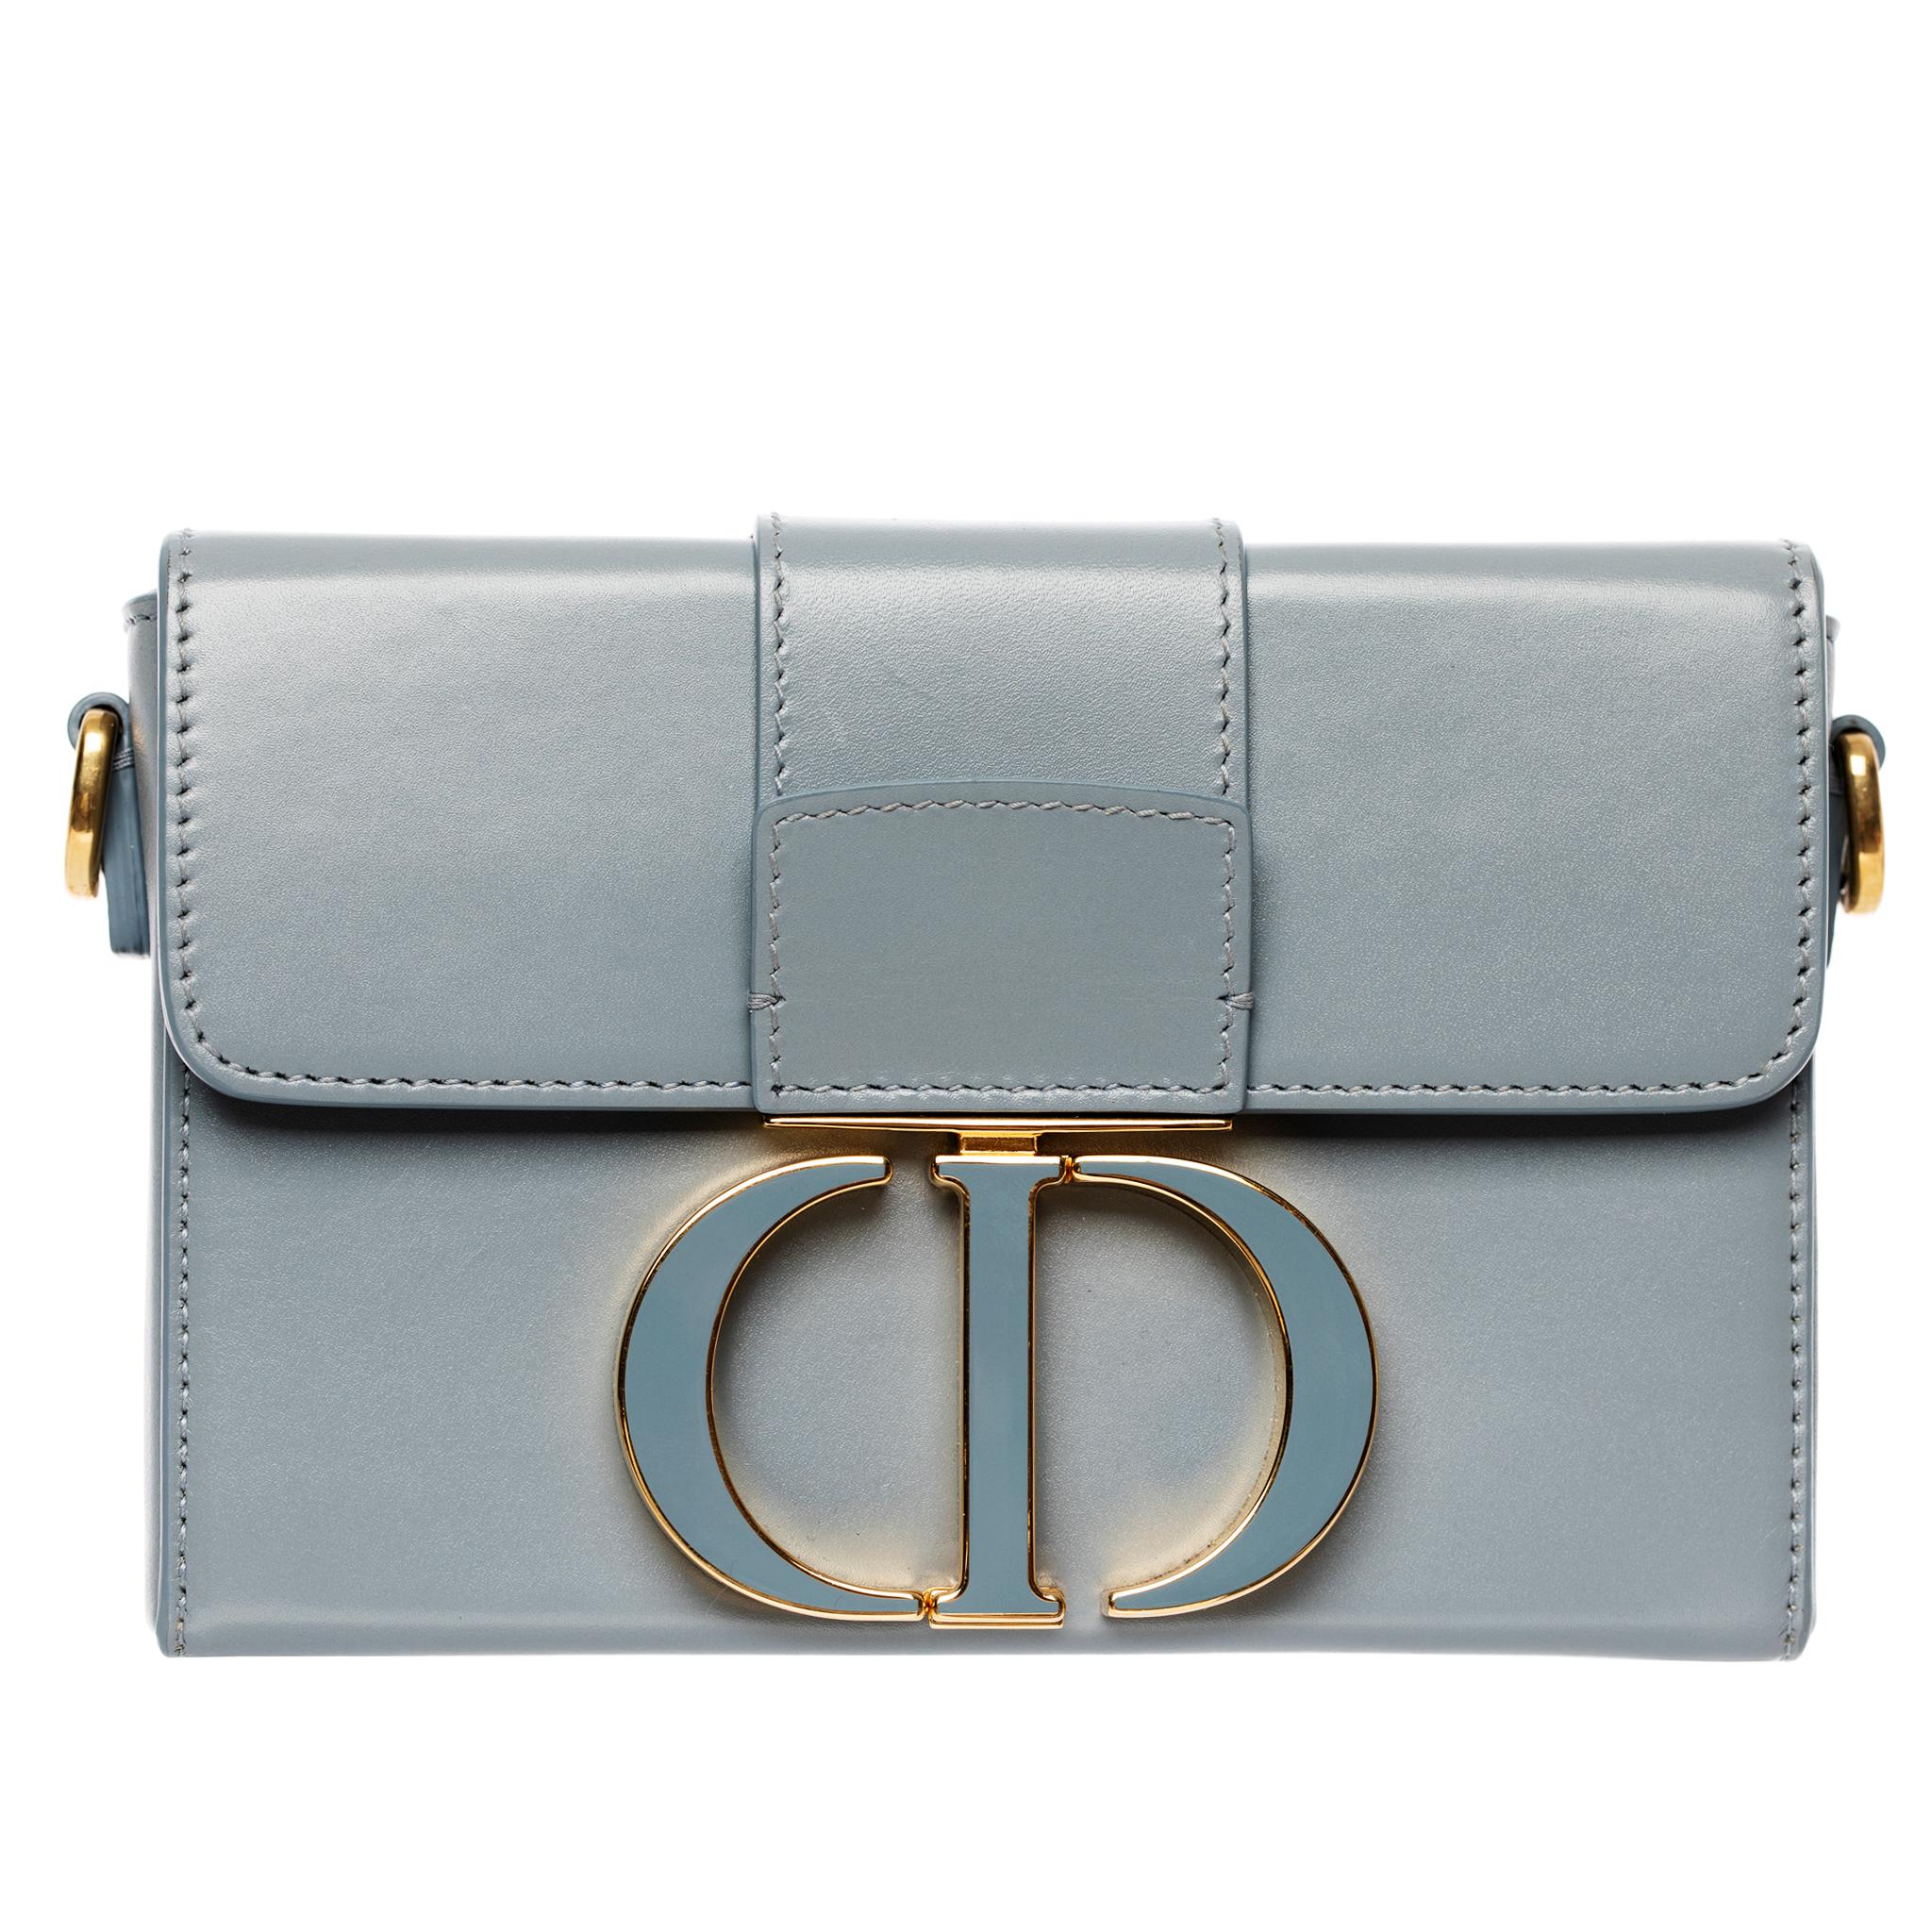 
Brand: Christian Dior

Product: 30 Montaigne Bag

Size: L 15 x H 11 x D 4 CM

Strap: Maximum: 57 Cm

Colour: Blue-Grey

Material: Smooth Leather

Hardware: Gold-Tone

Condition: Preloved; Excellent

Accompanied By: Bag, Dustbag & Authenticity